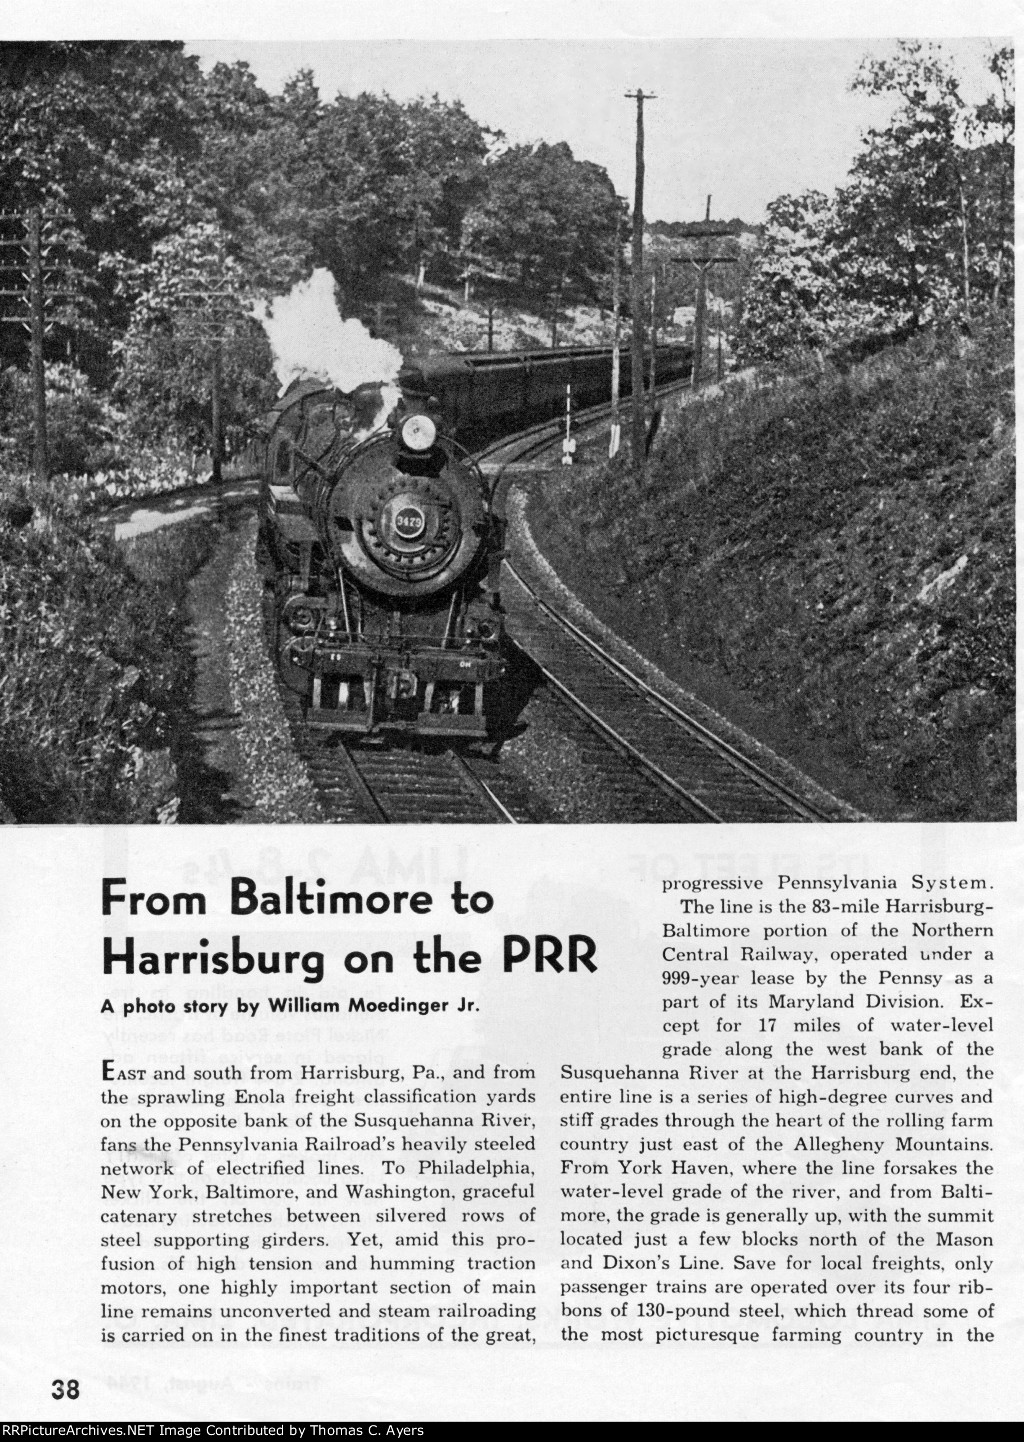 "From Baltimore To Harrisburg," Page 38, 1944